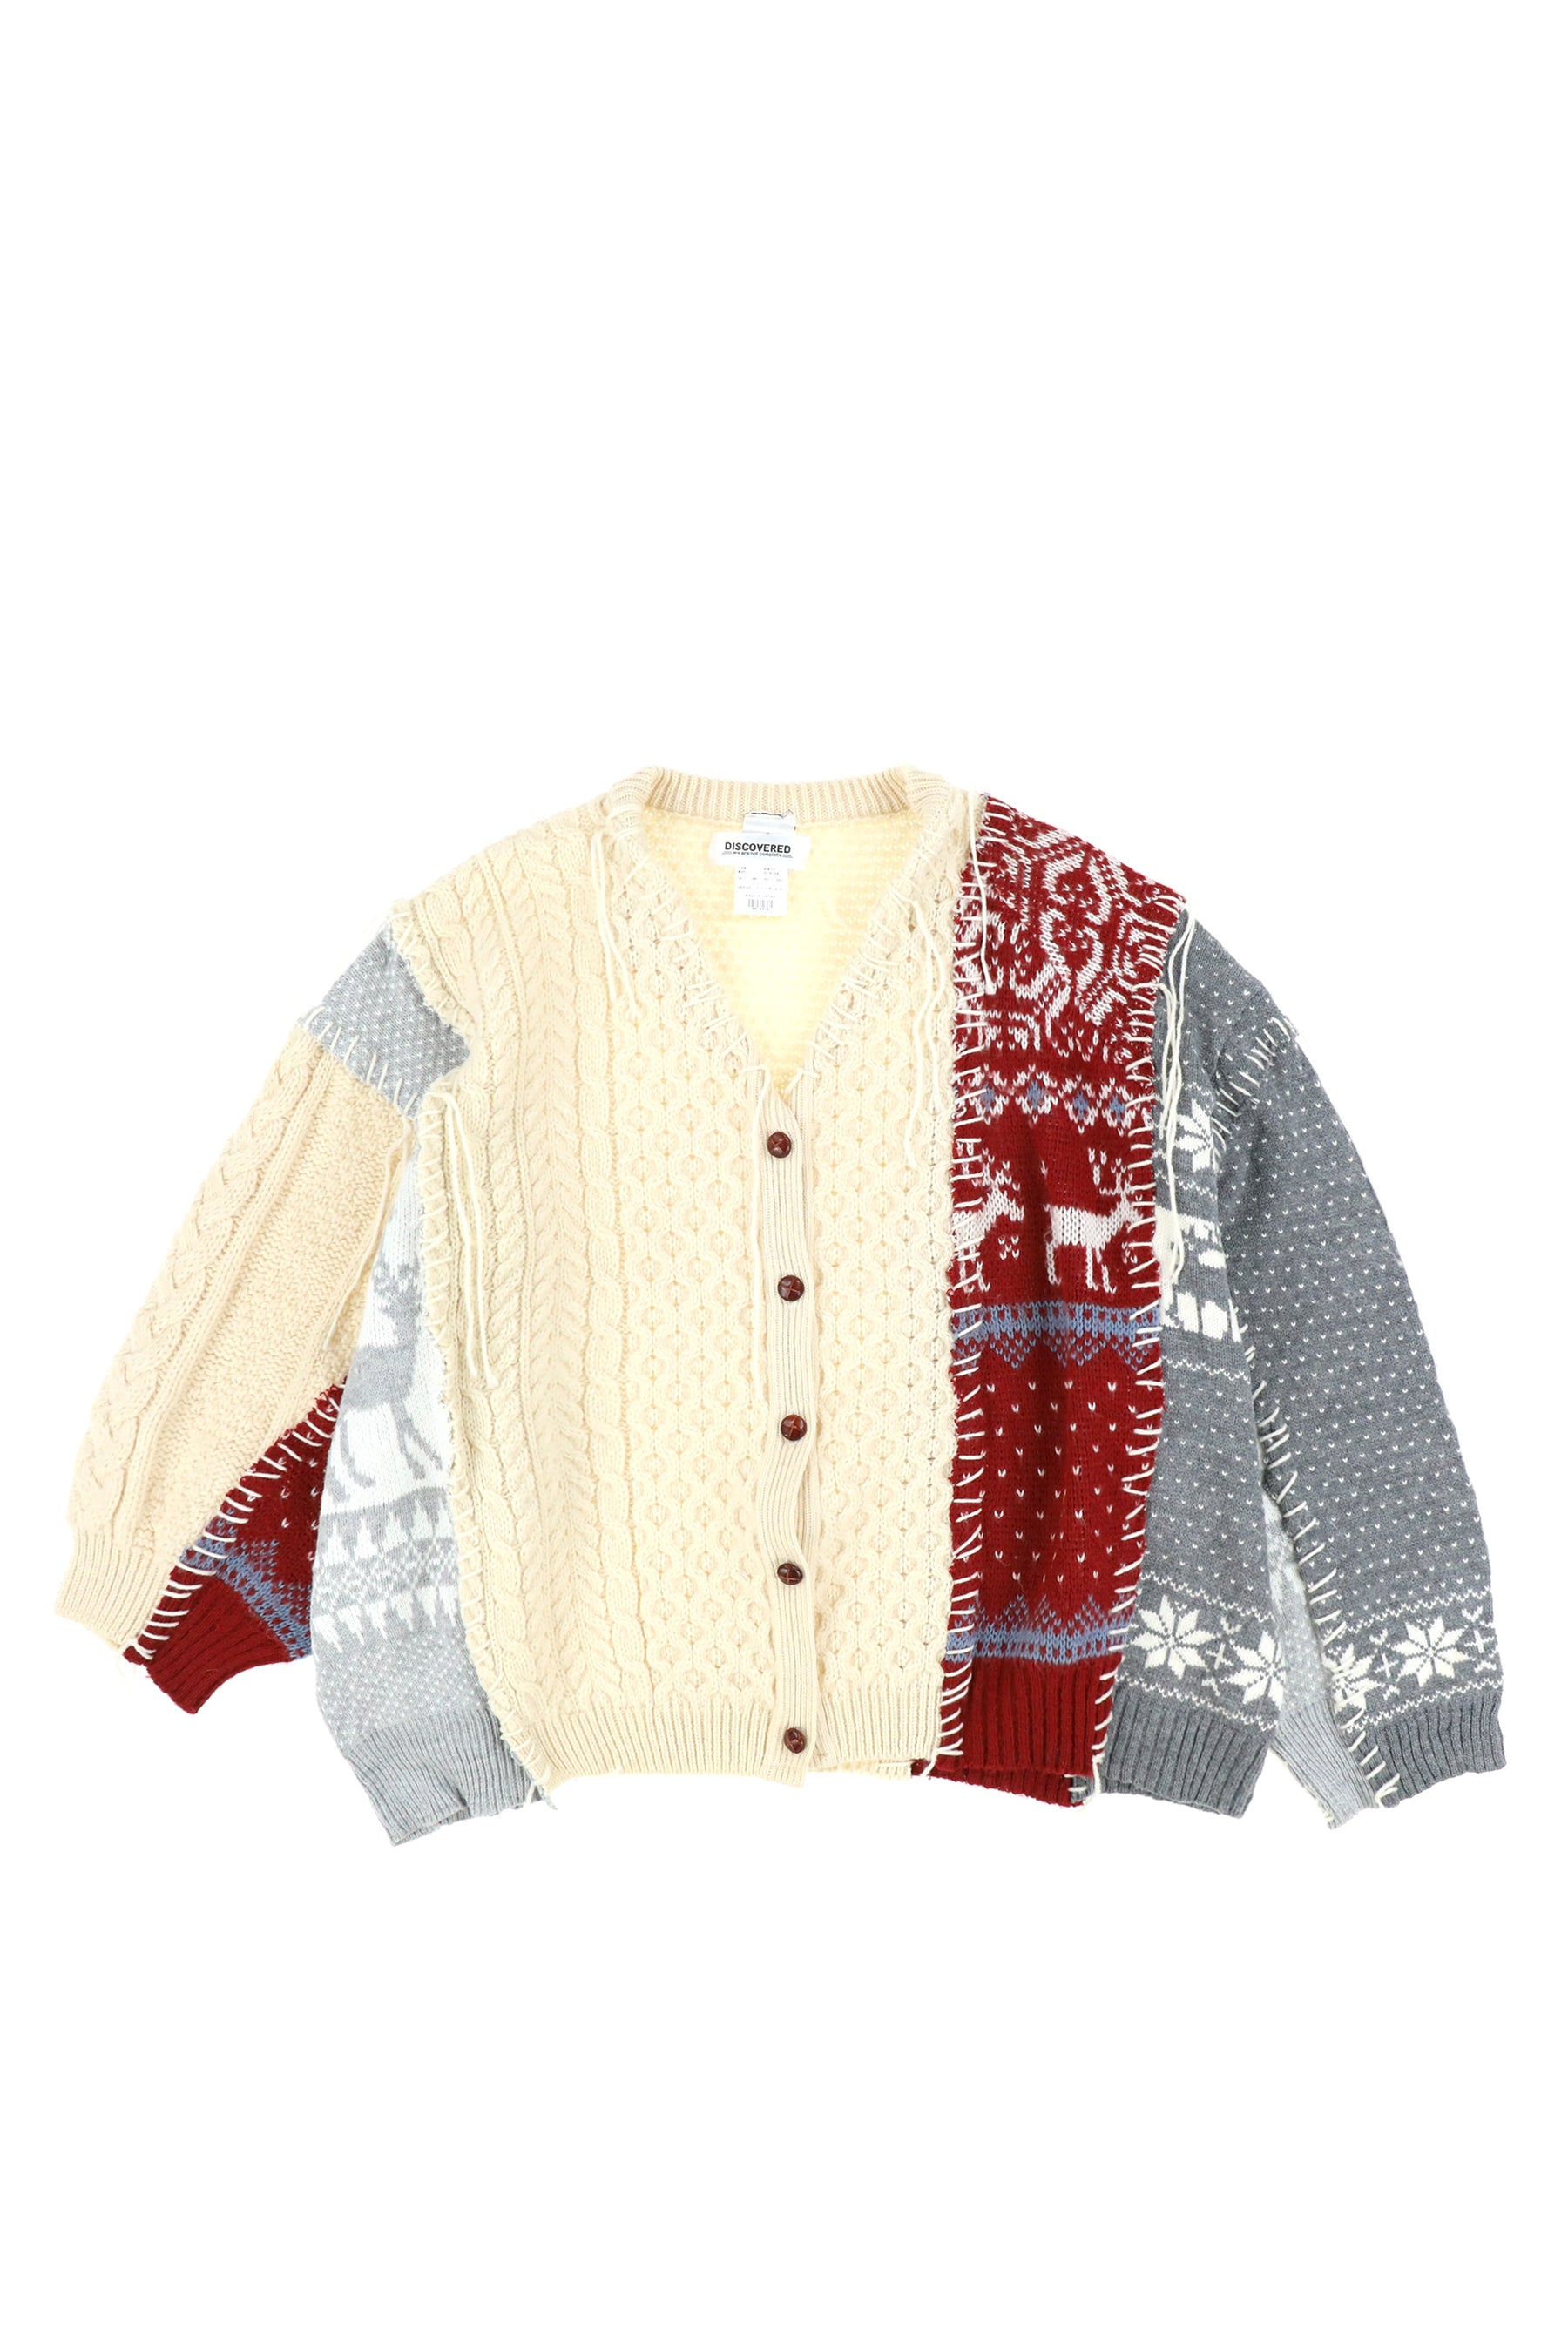 DISCOVERED ディスカバード FW22 NORDIC COLLAGE KNIT CARDIGAN